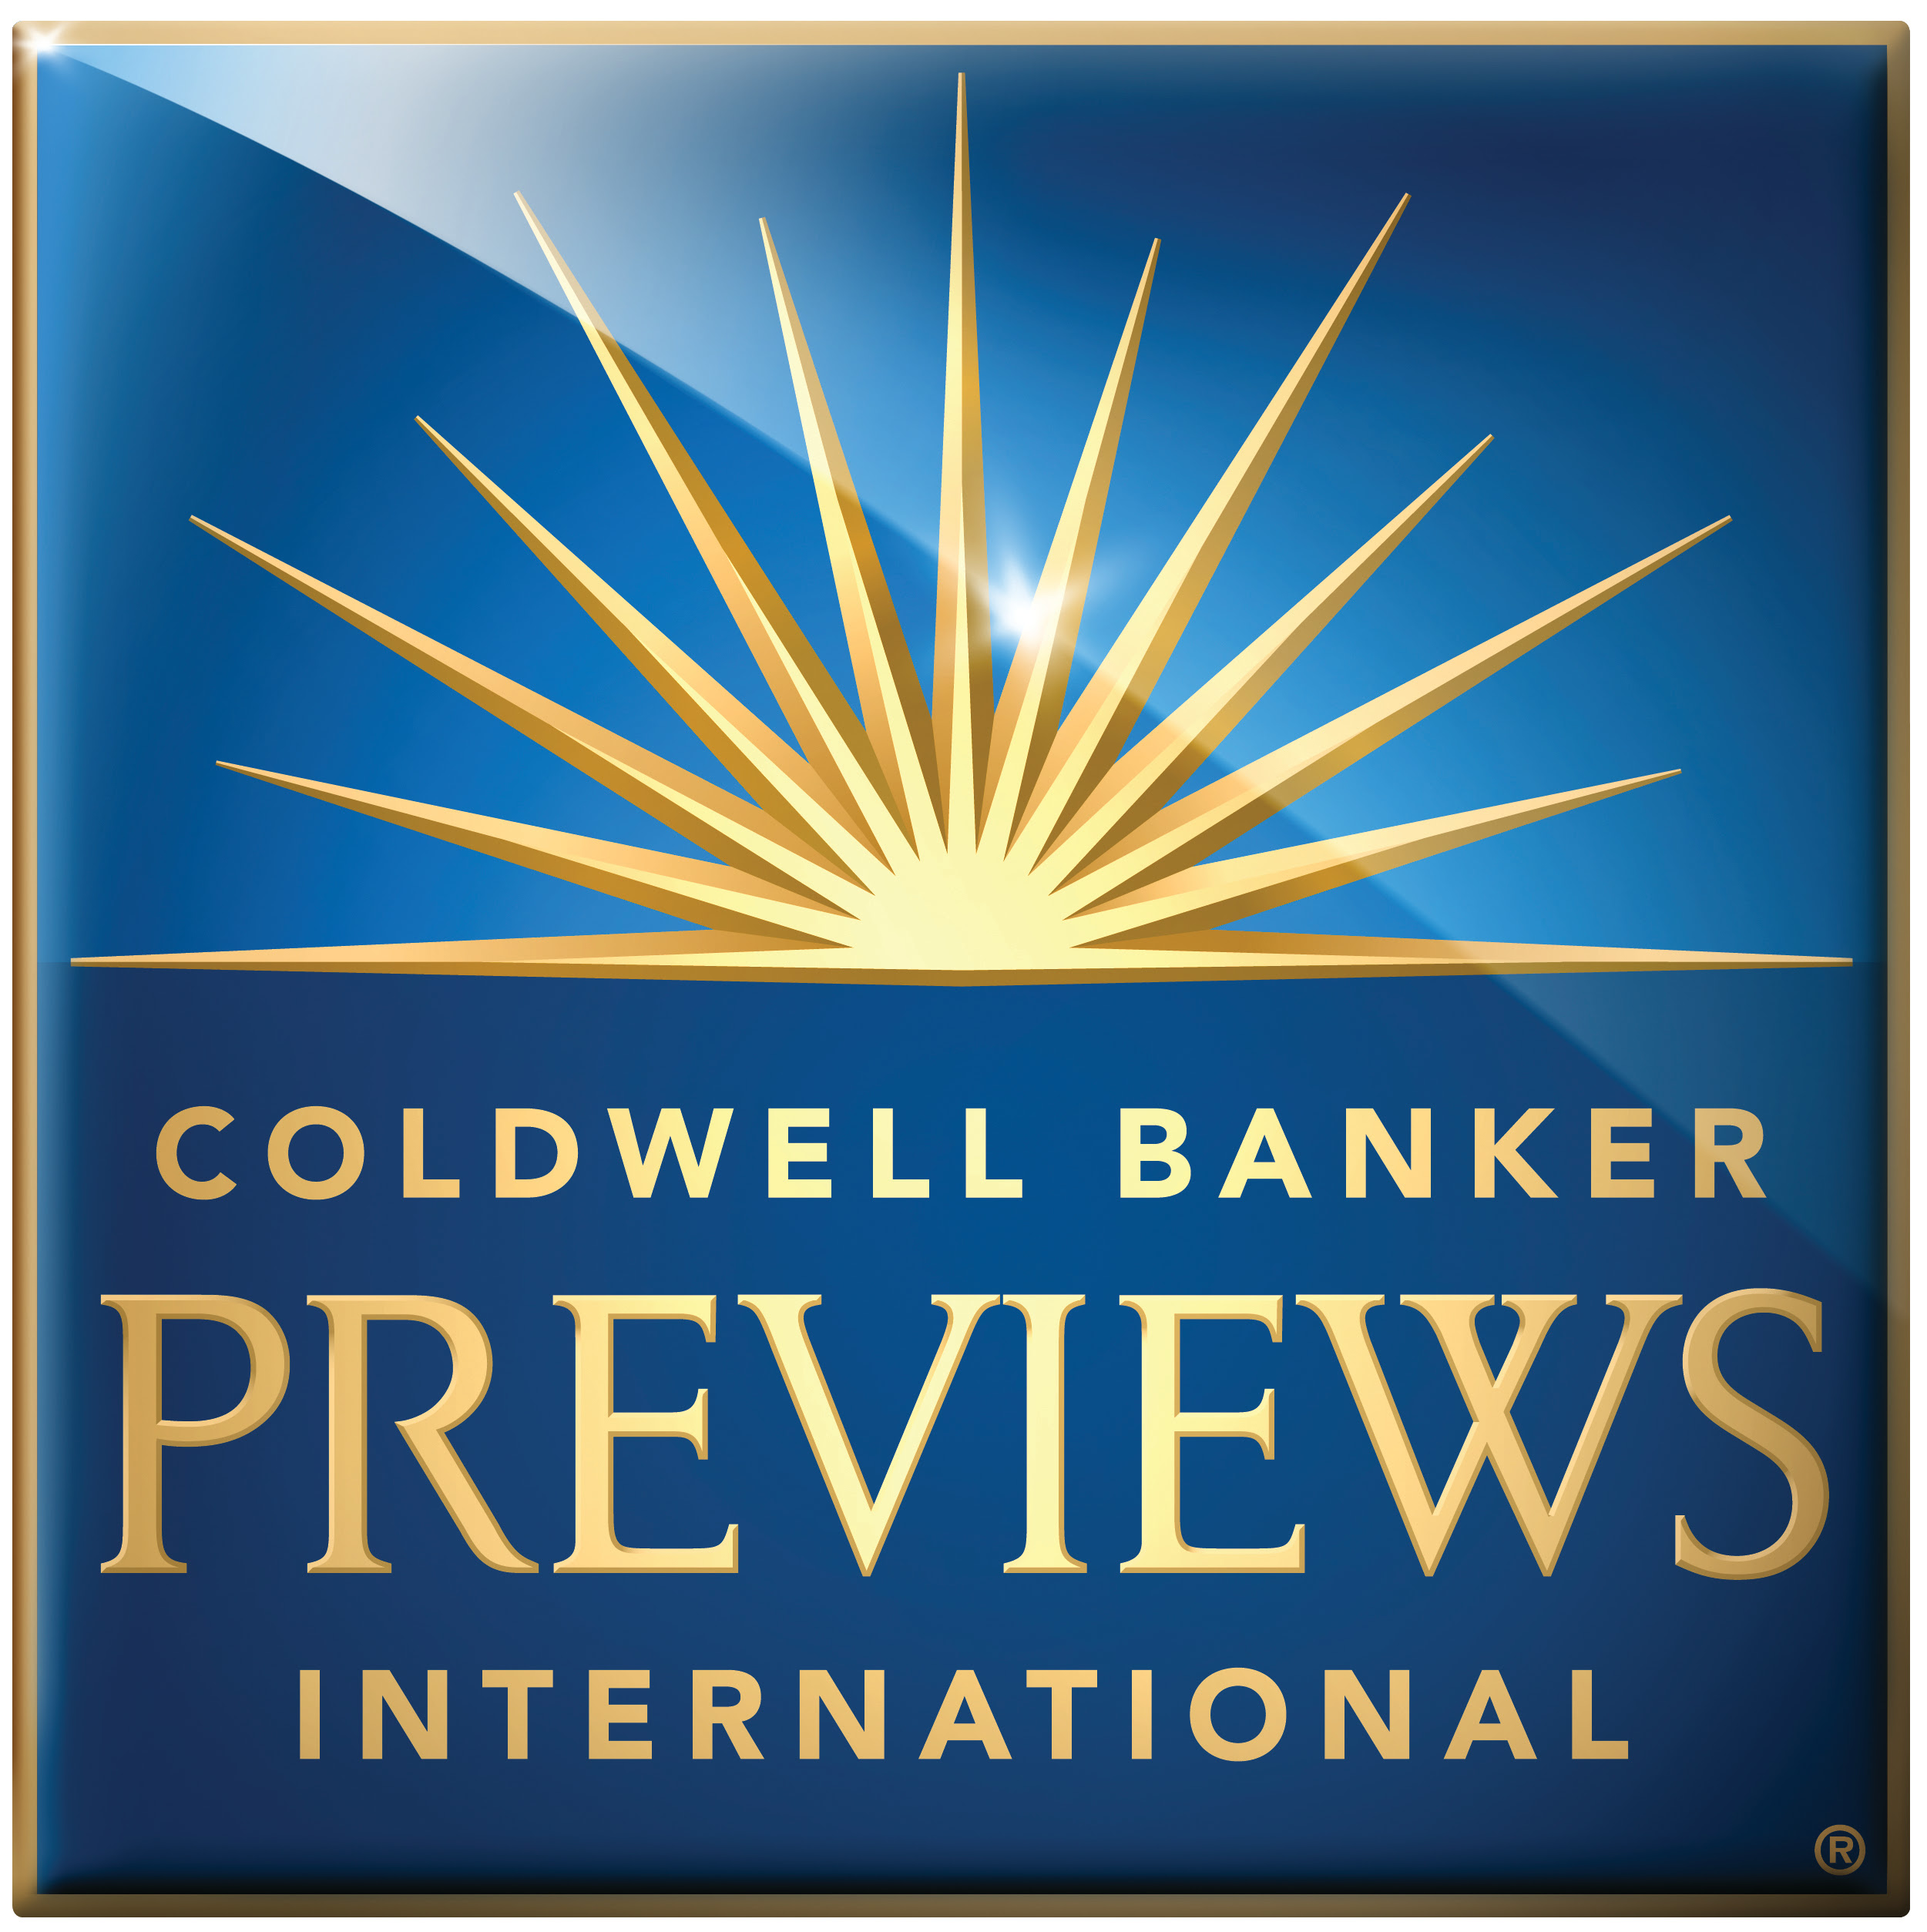 Coldwell Banker previews